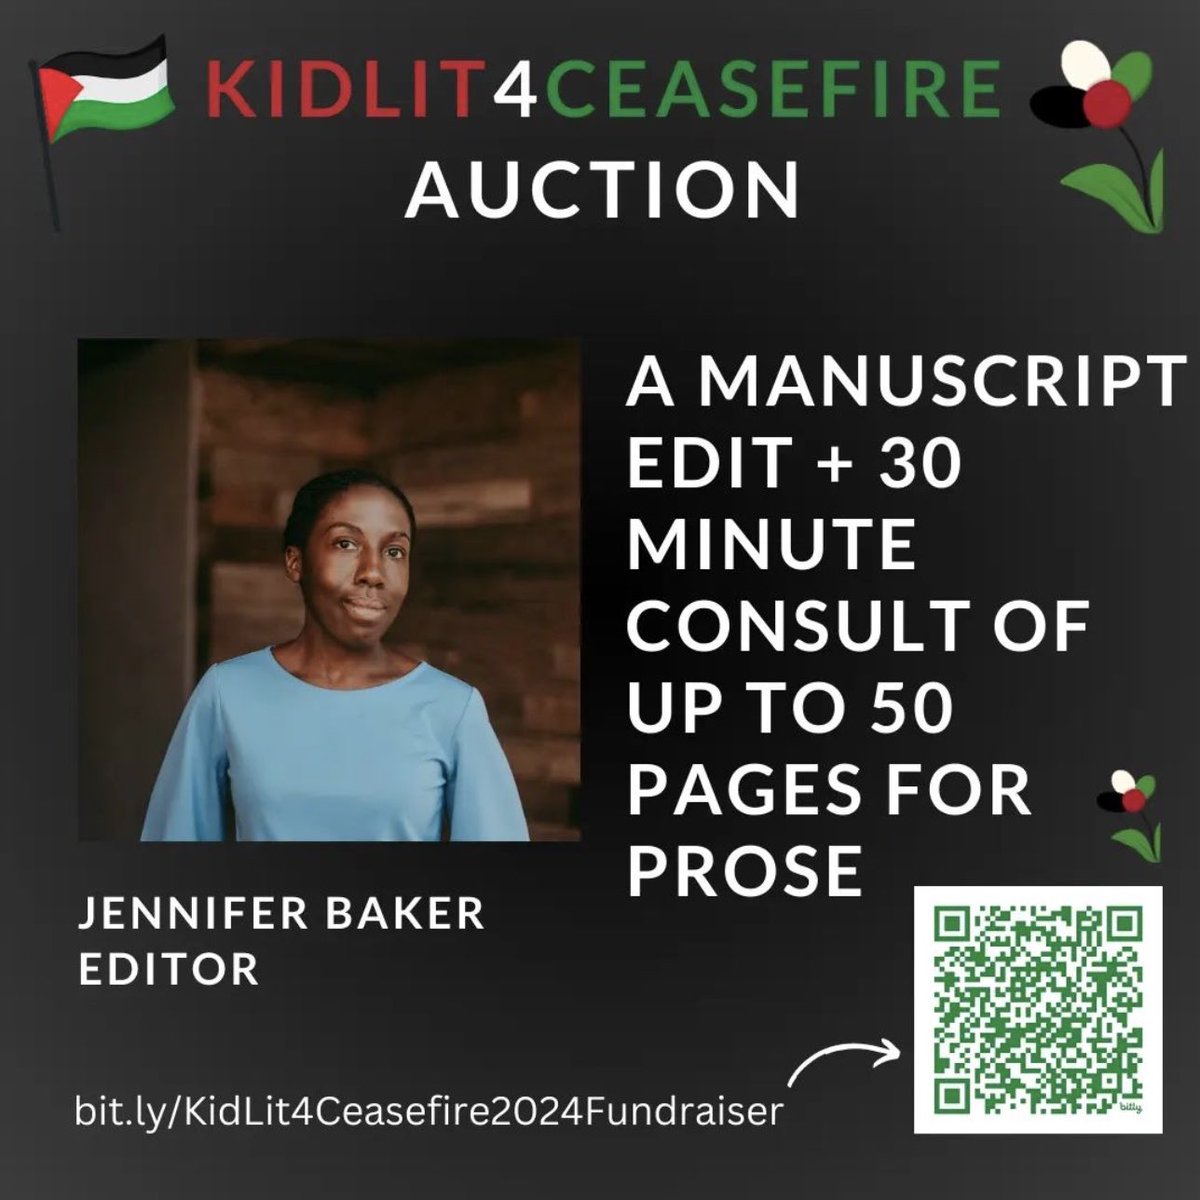 Hey y’all! Tomorrow (4/11) at 10pm EST is the last day to get in on the auctions for #KidLit4Ceasefire where all proceeds go to orgs helping folx in Palestine, Sudan, and Congo. Hundreds of items are up for grabs! #AltText 32auctions.com/KidLit4Ceasefi…